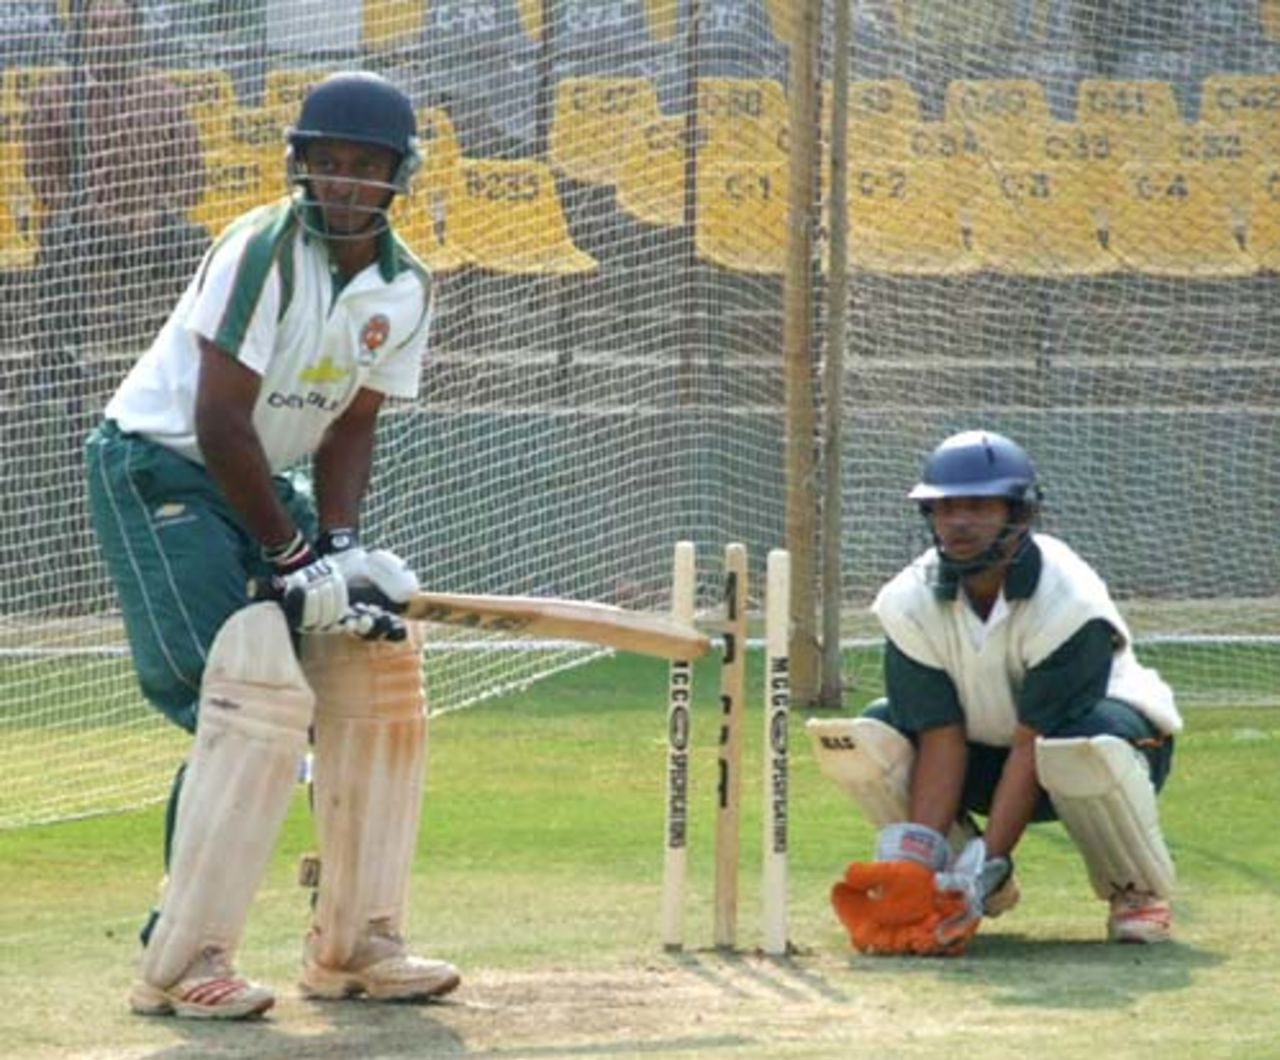 Baroda's Connor Williams has a hit in the nets, Indore, January 4, 2008